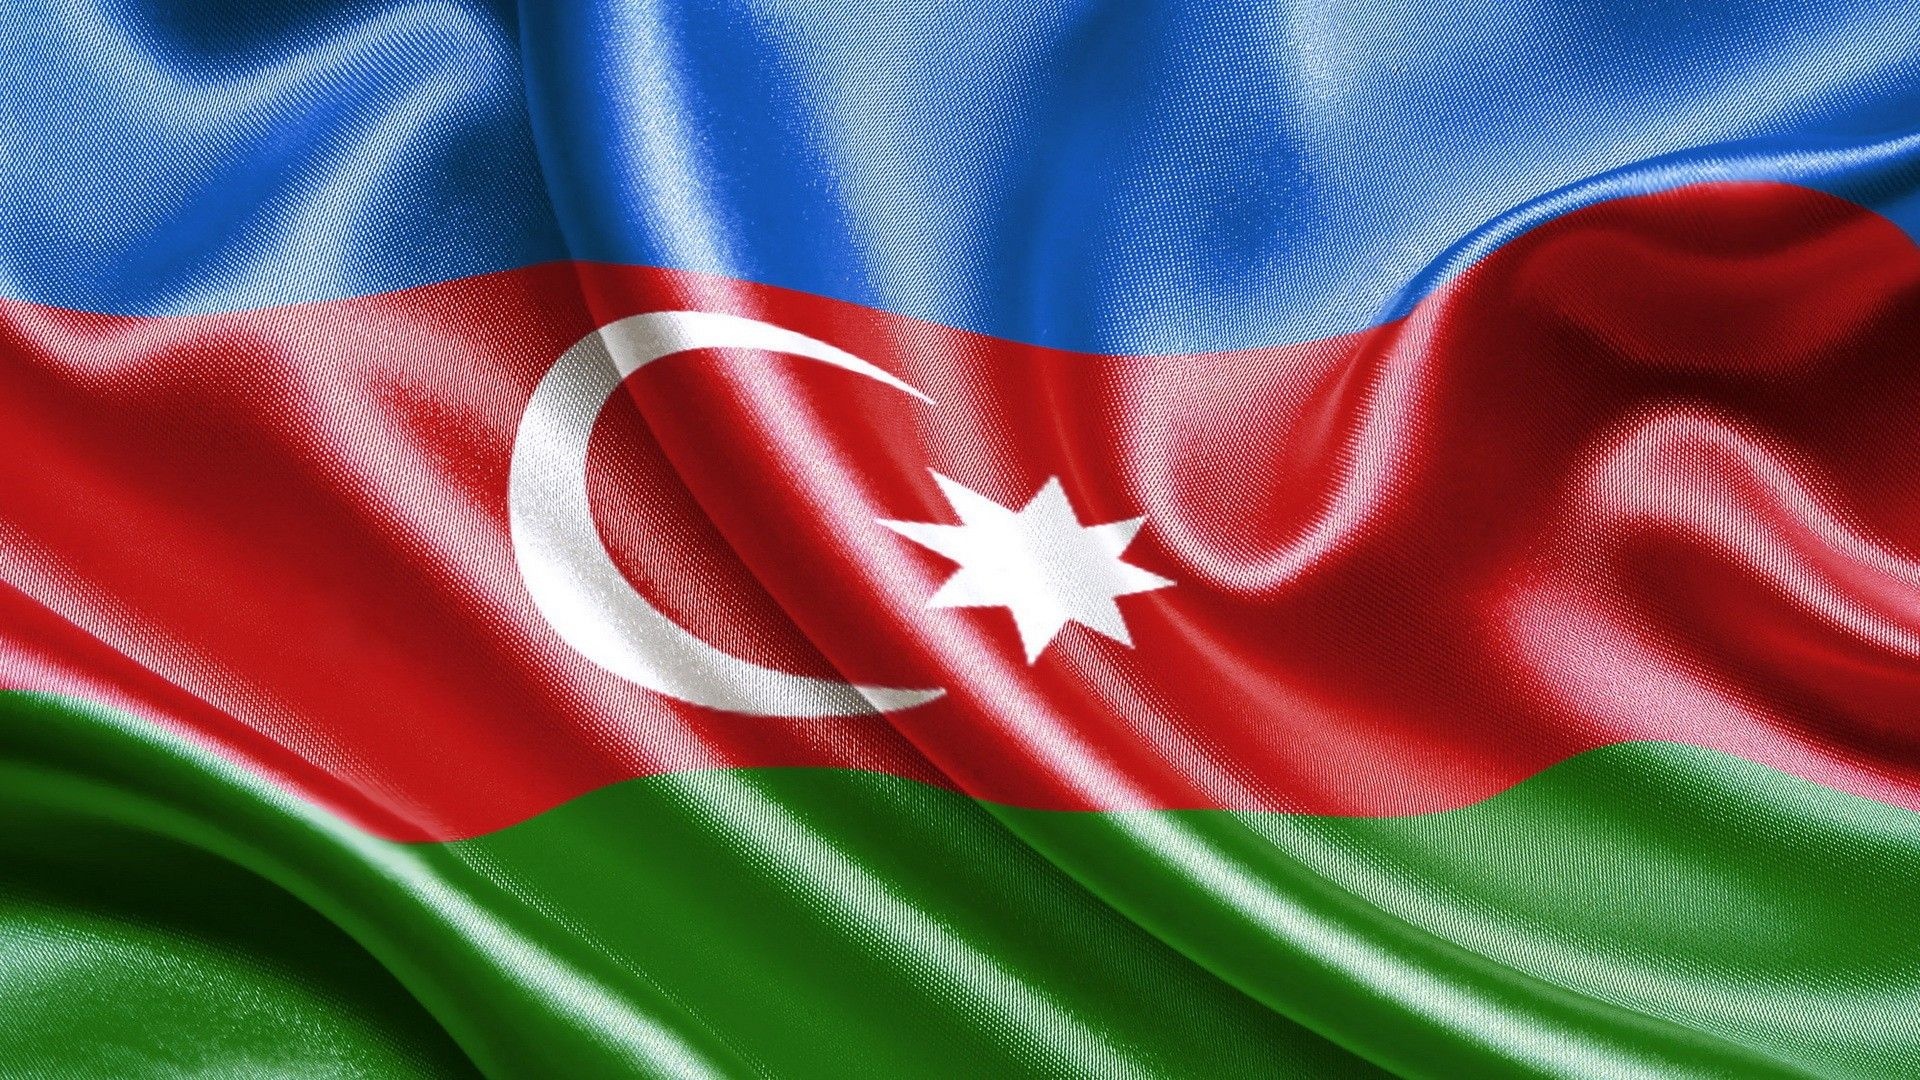 Azerbaijan: Situated on the eastern side of Transcaucasia on the shores of the Caspian Sea. 1920x1080 Full HD Background.